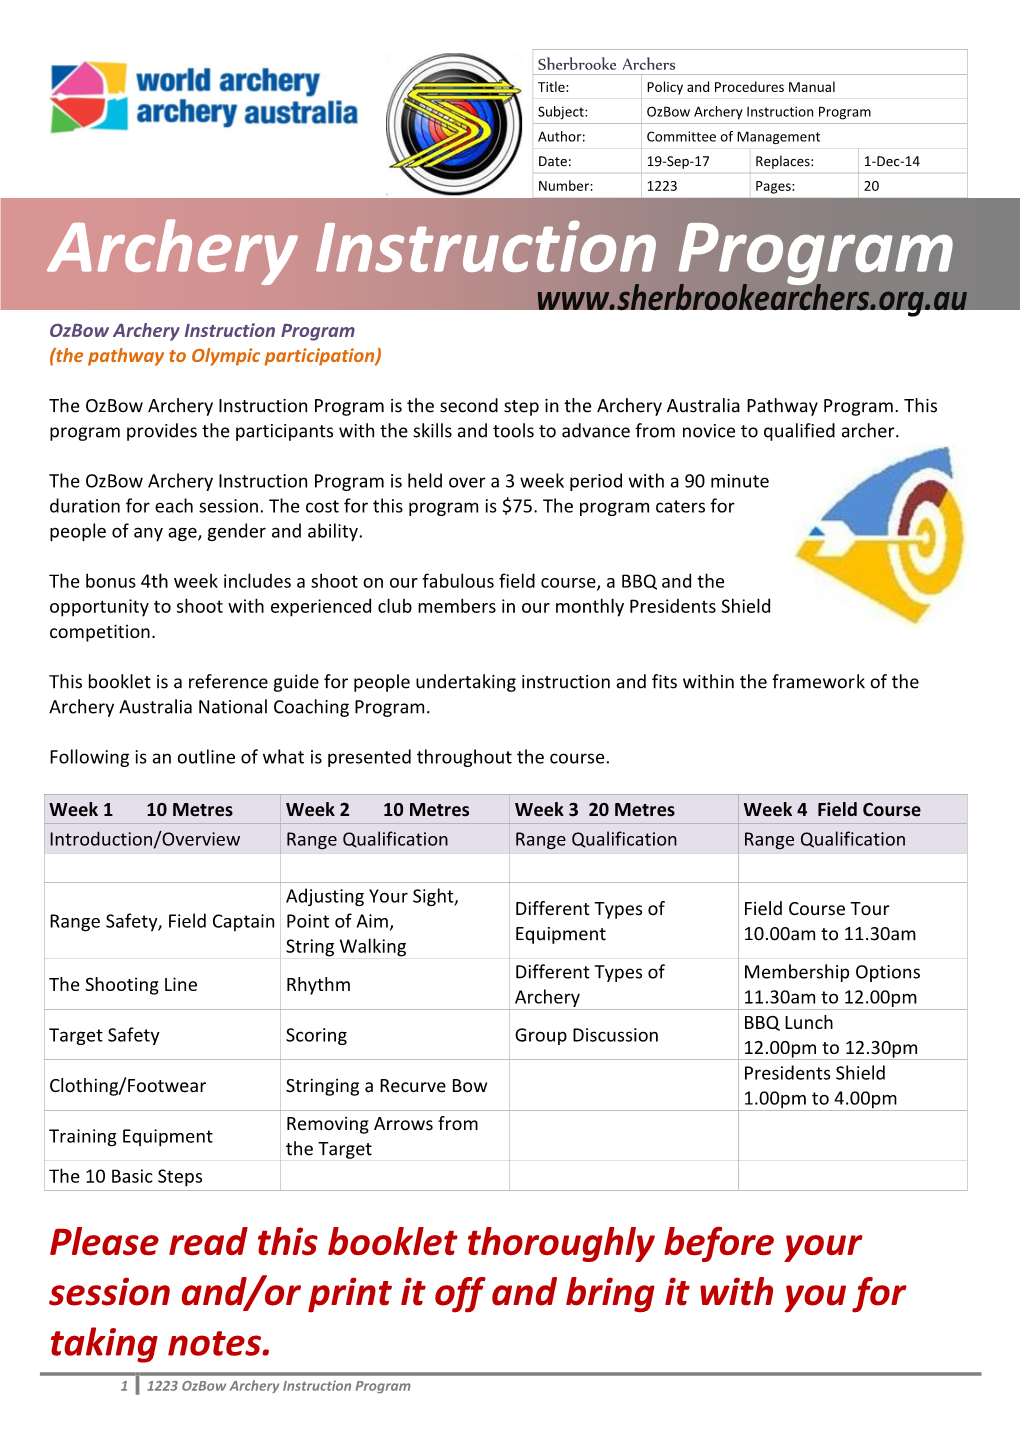 Archery Instruction Program Author: Committee of Management Date: 19-Sep-17 Replaces: 1-Dec-14 Number: 1223 Pages: 20 Archery Instruction Program